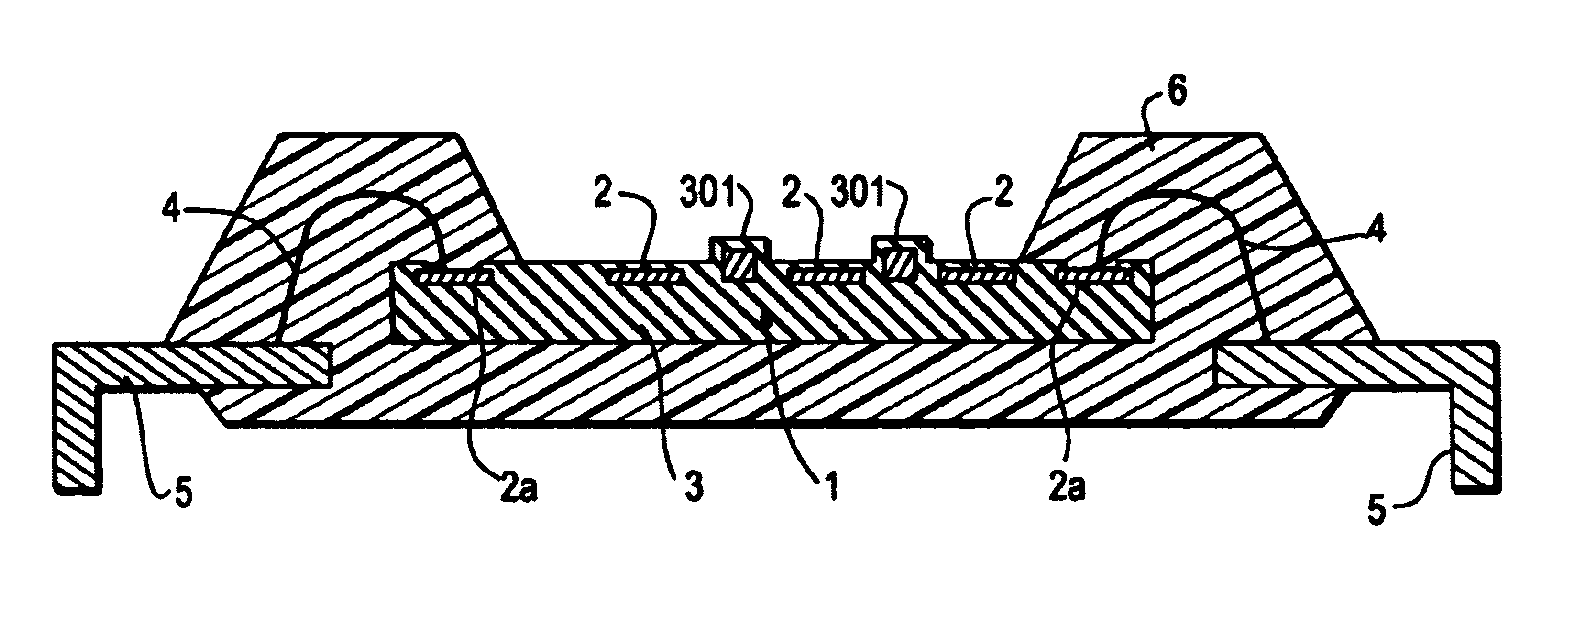 Semiconductor apparatus for fingerprint recognition